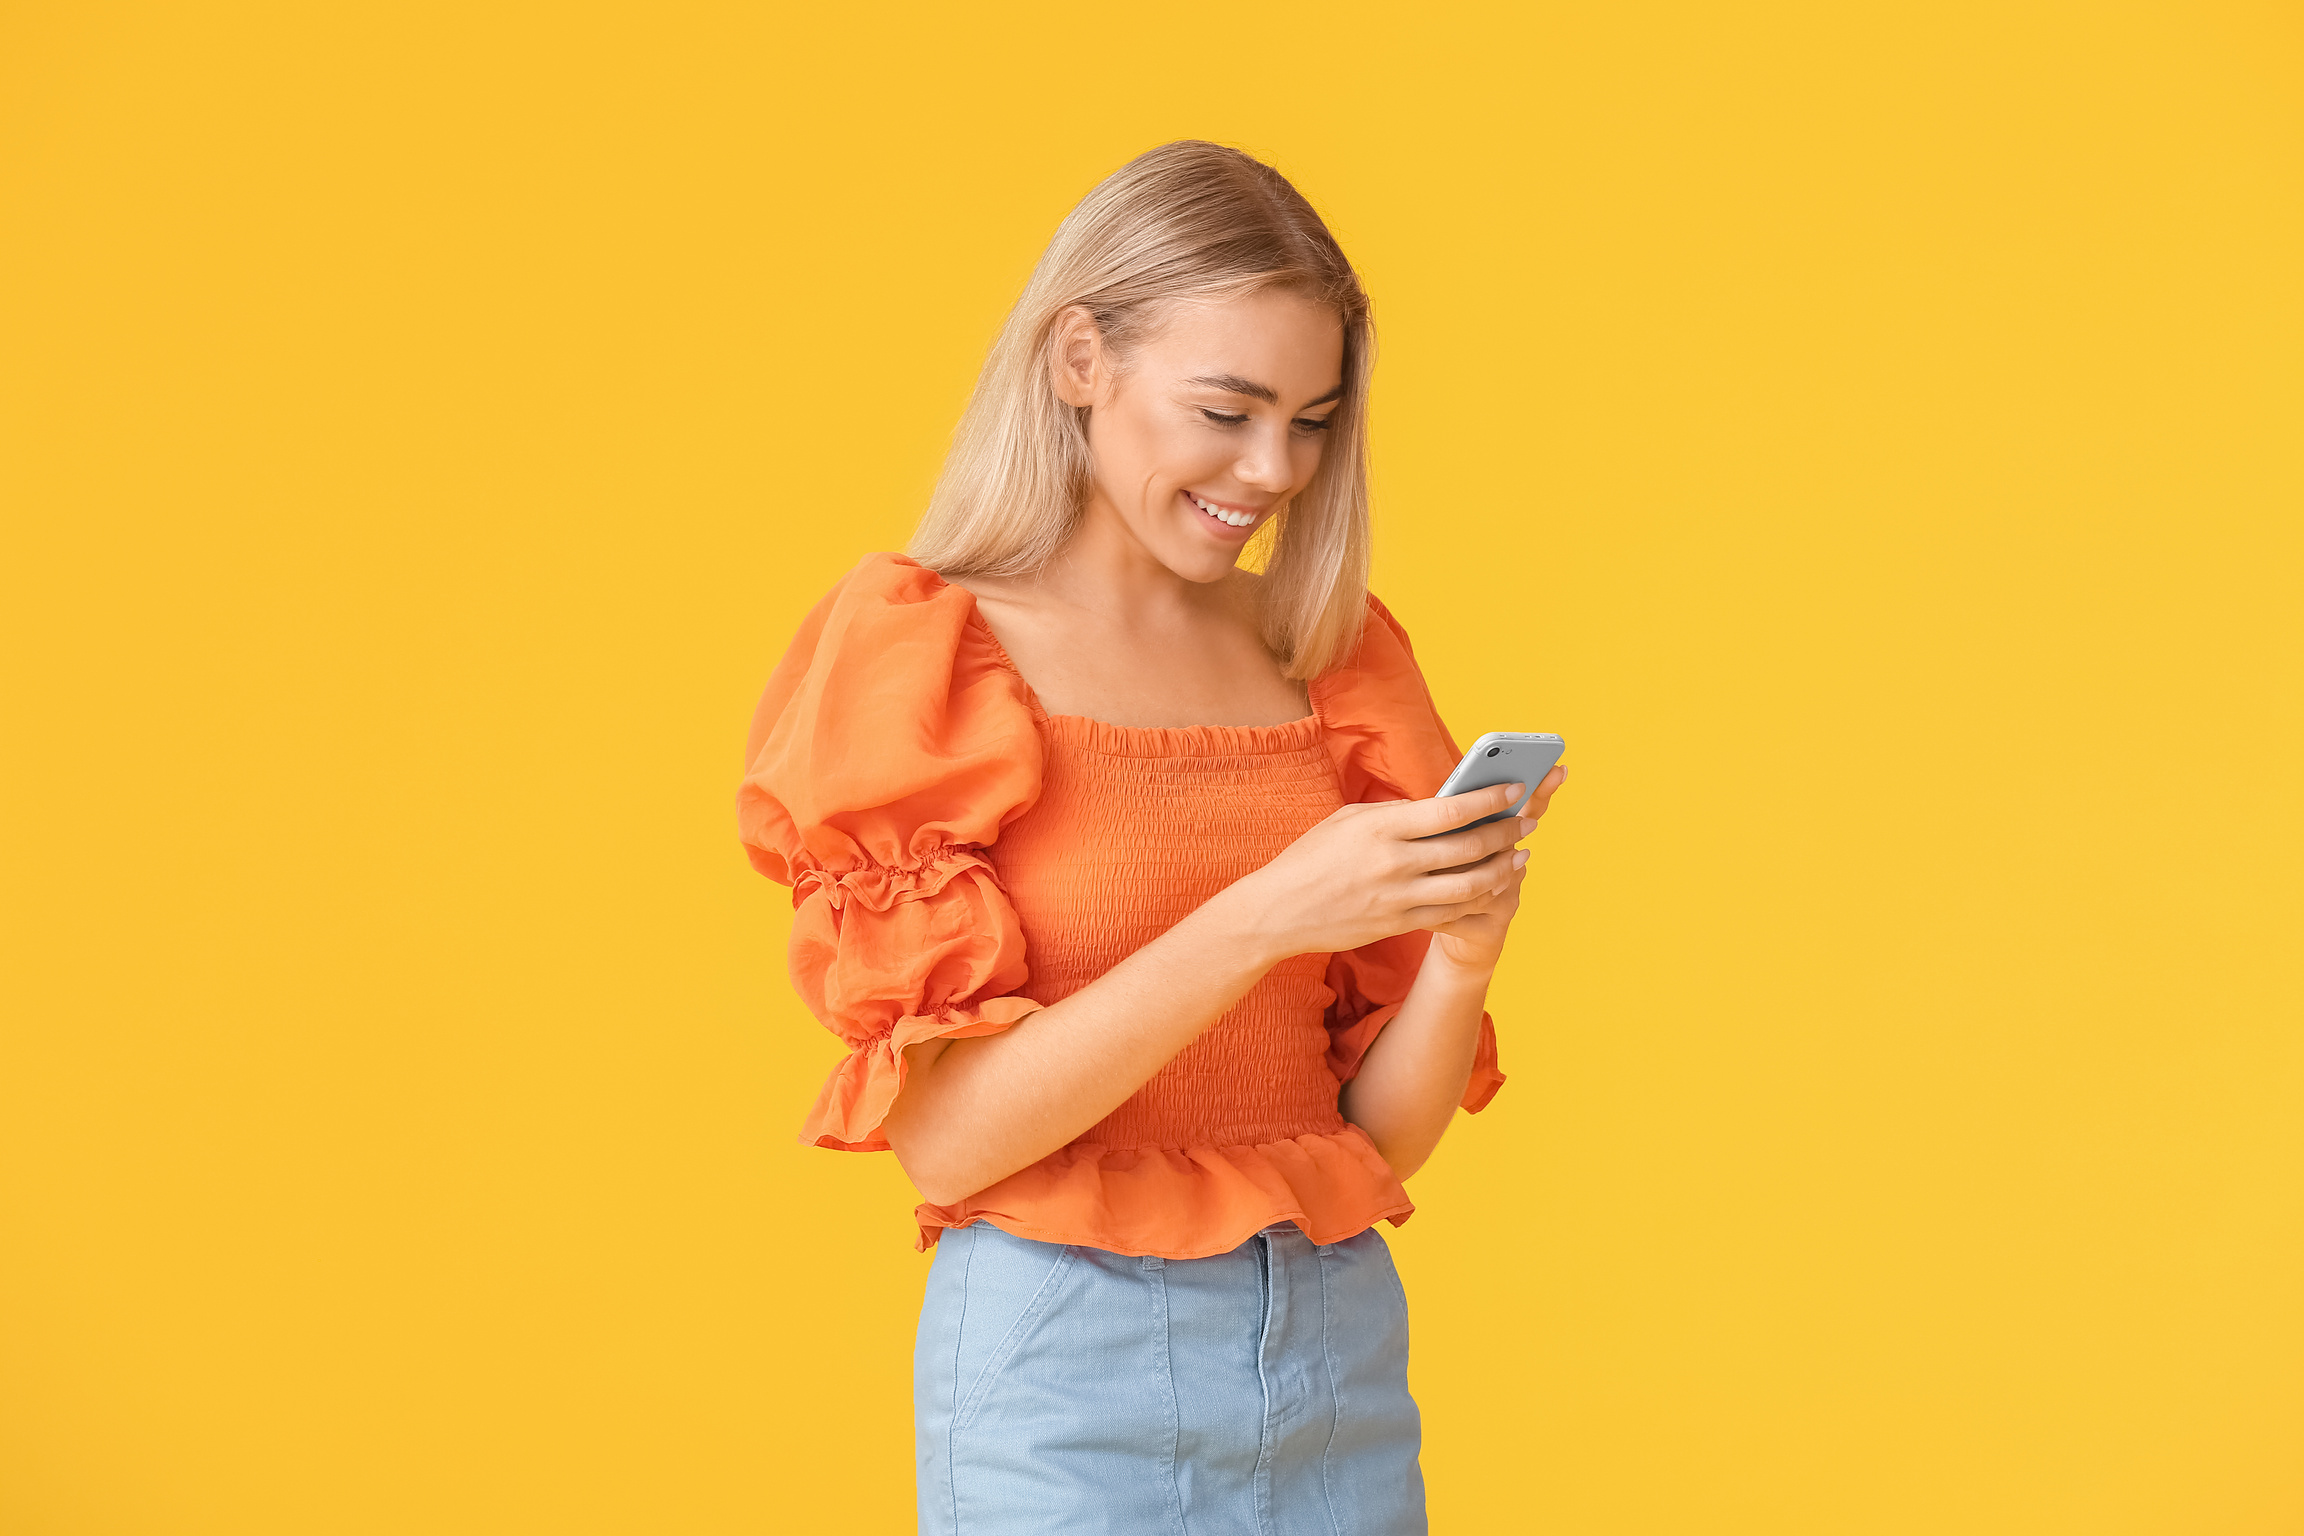 Teenage Girl with Mobile Phone on Color Background